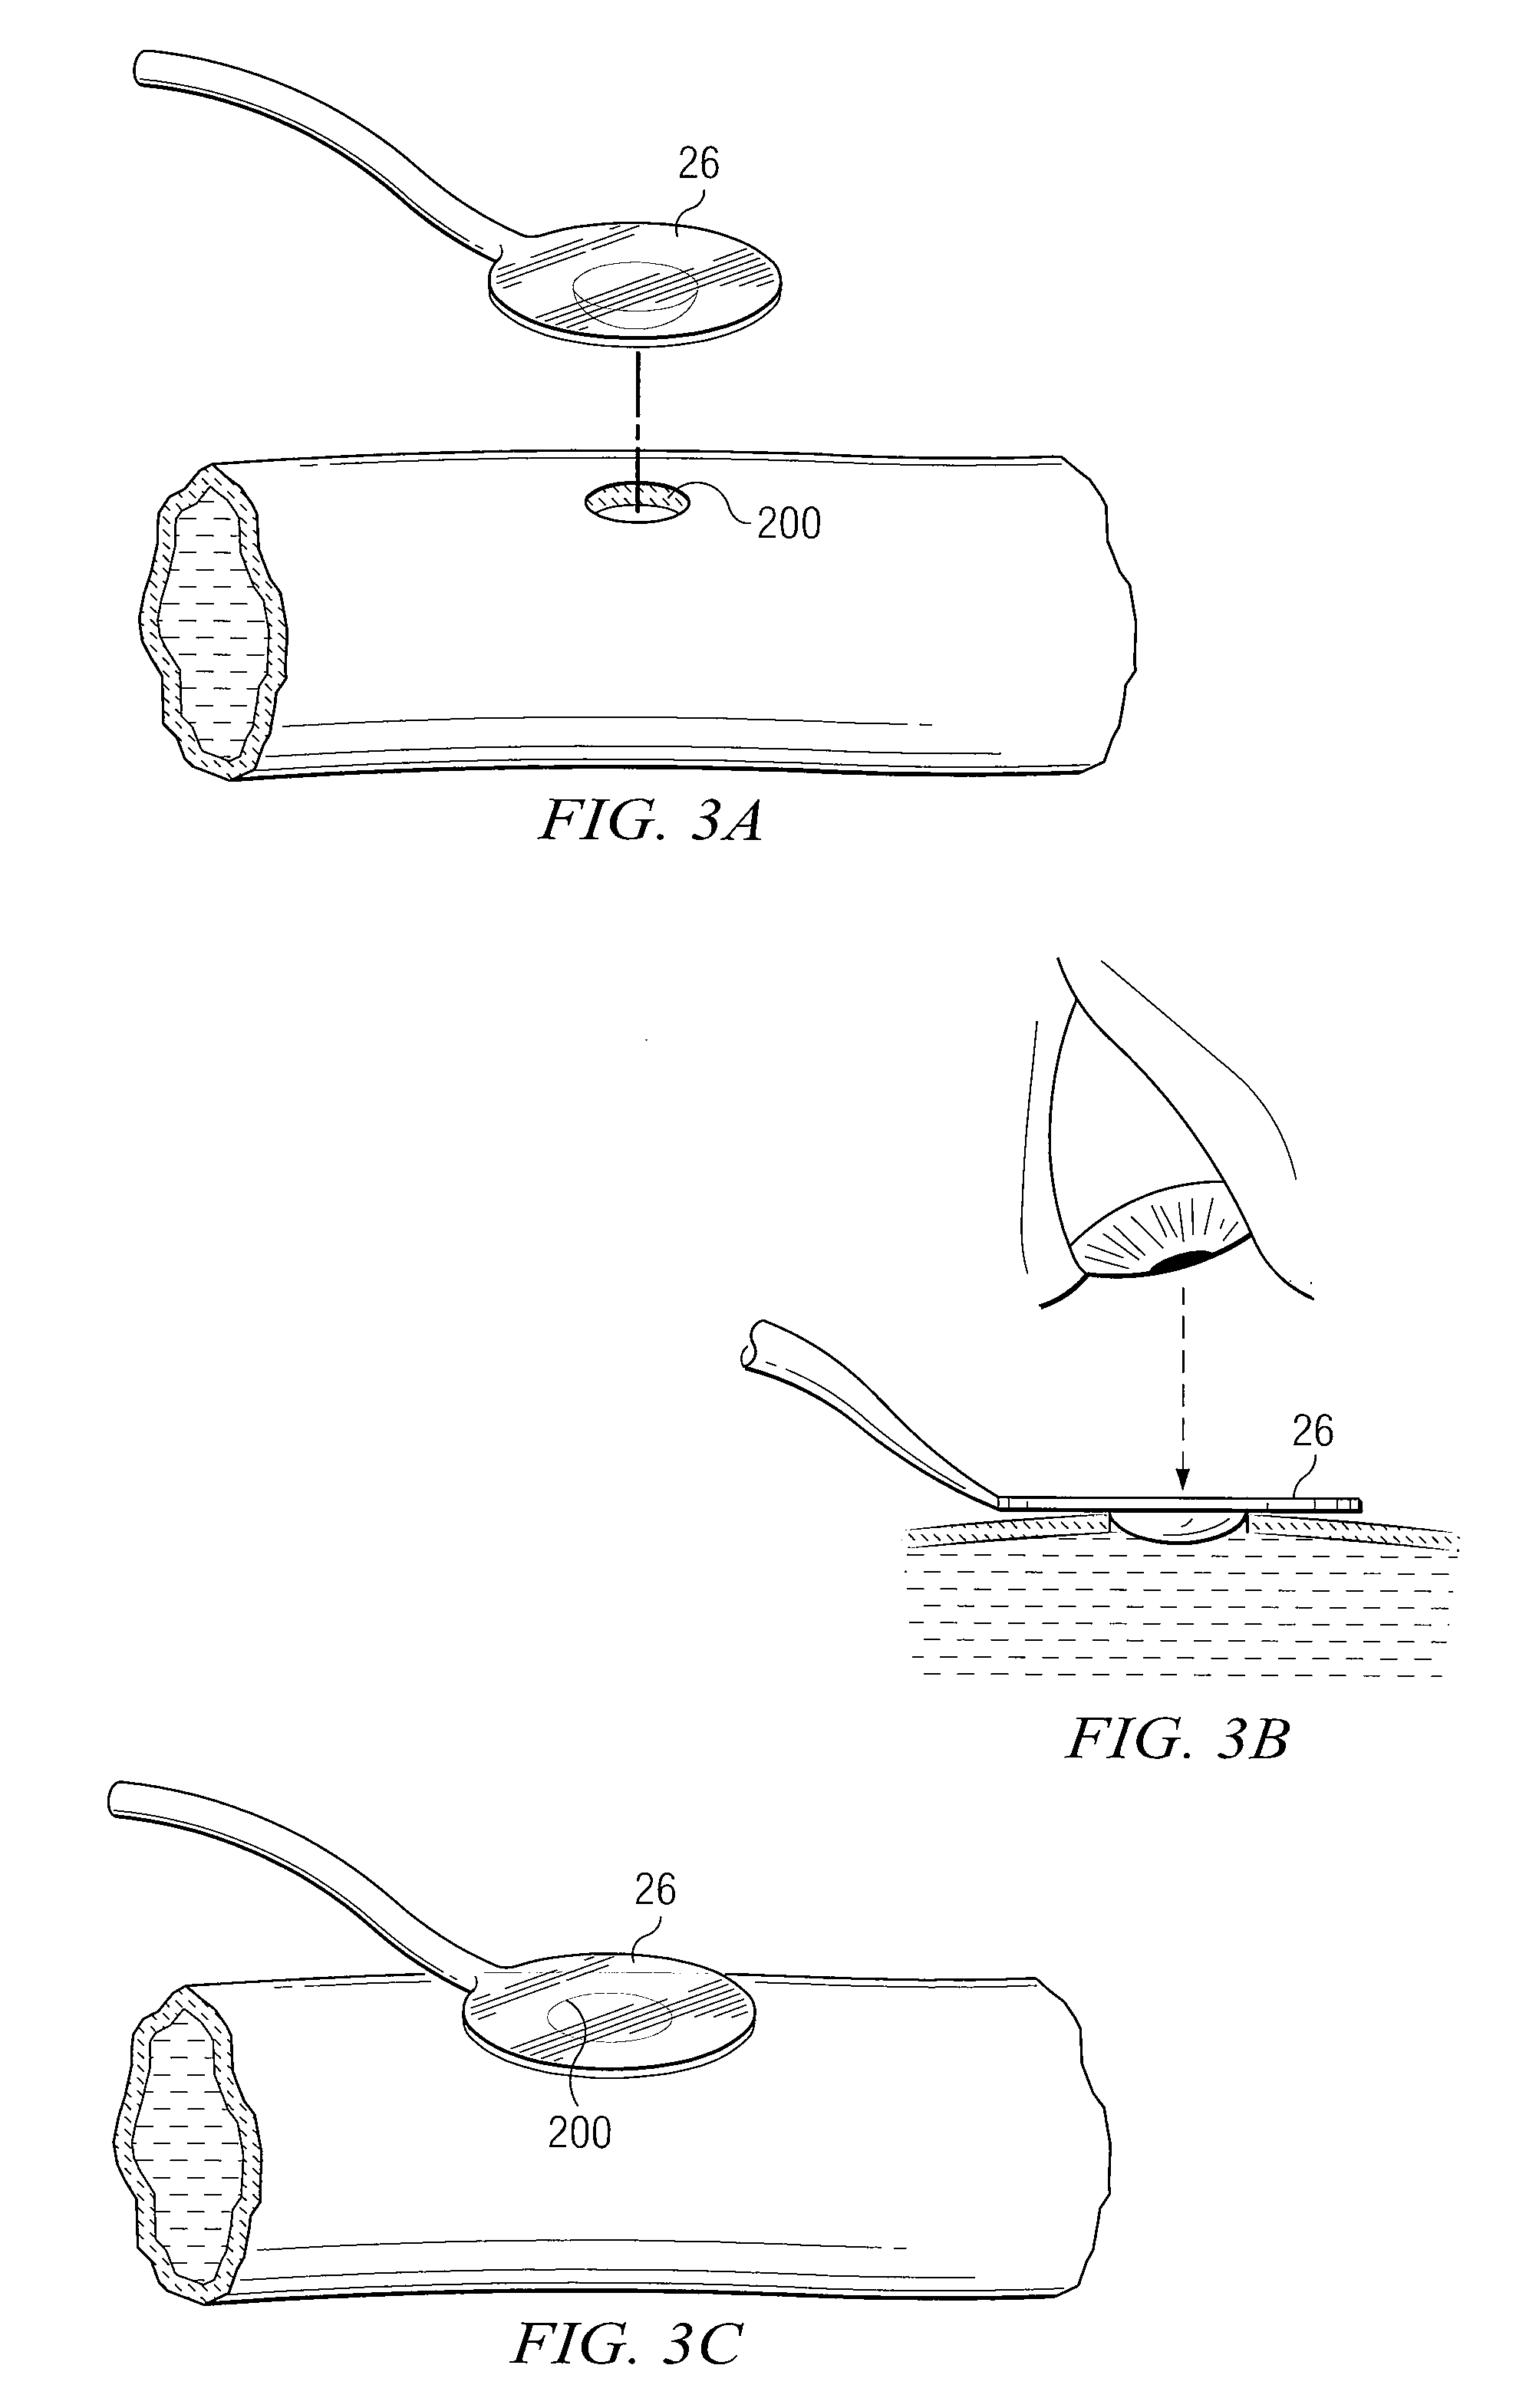 System and Method for Providing an Obturator for Enhanced Directional Capabilities in a Vascular Environment